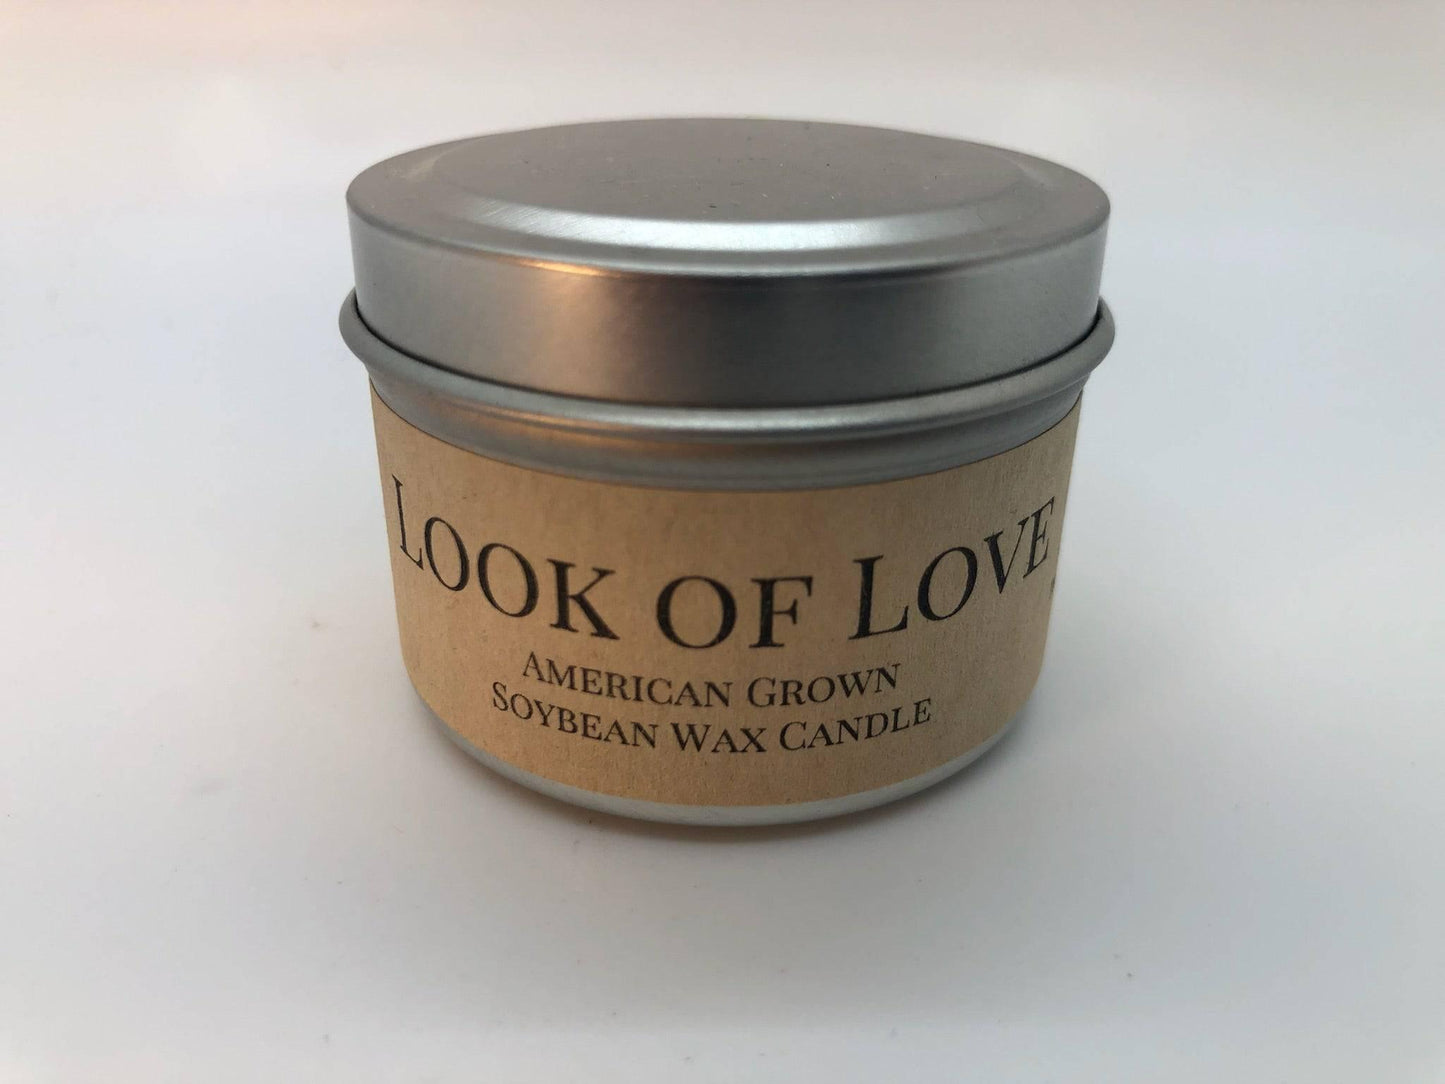 Look of Love Soy Wax Candle | 2 oz Travel Tin - Prairie Fire Candles